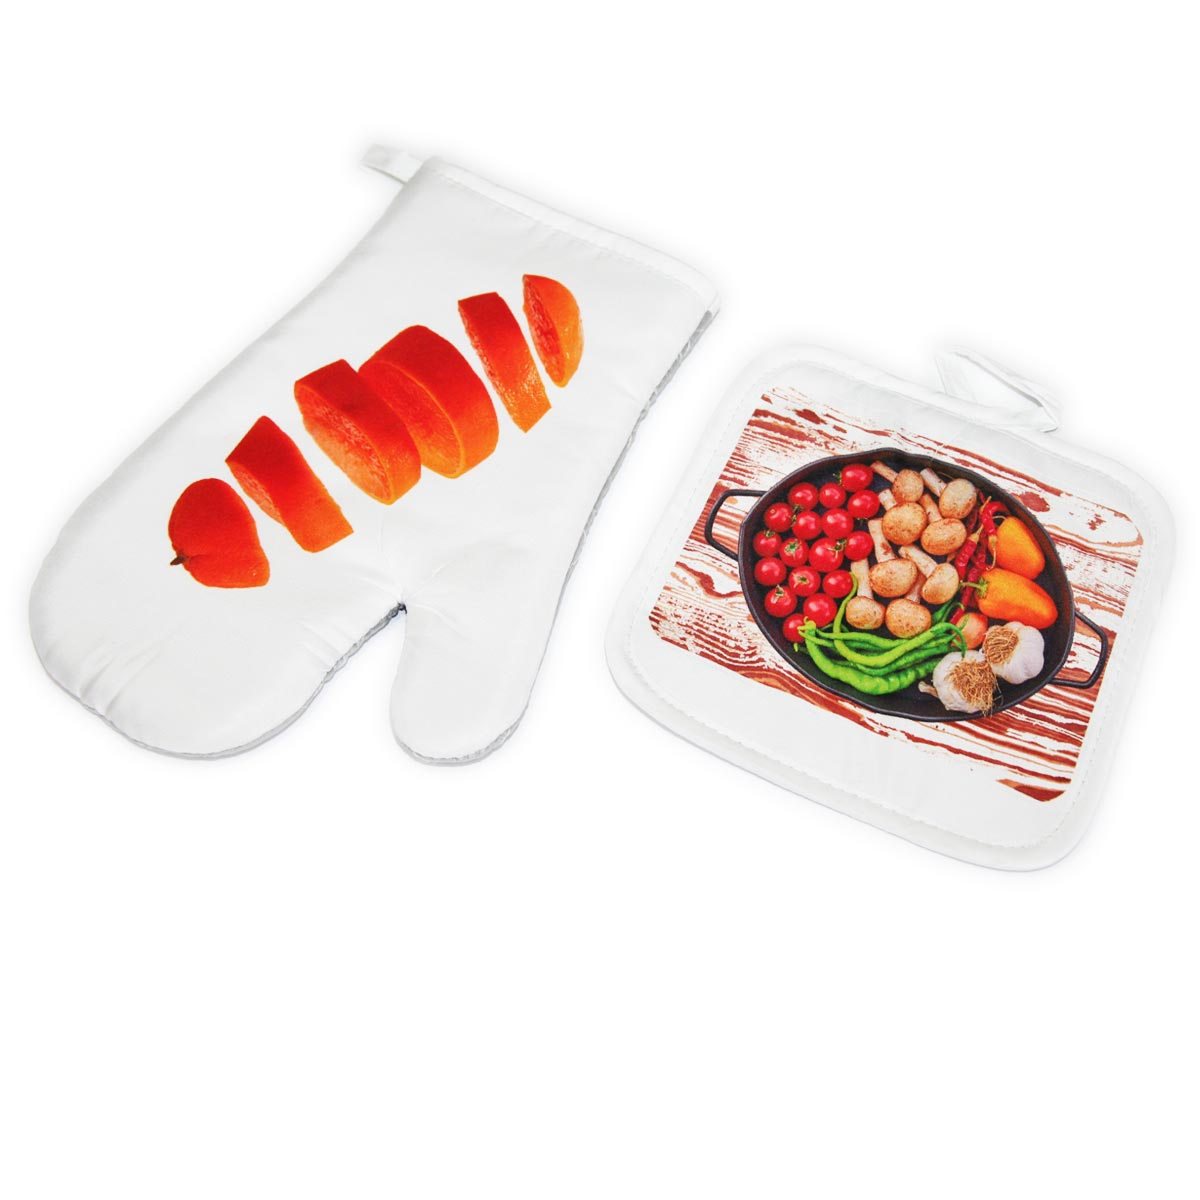 Oven Gloves Sublimation (Basic and Premium) – Granny's Sublimation Blanks  RTS